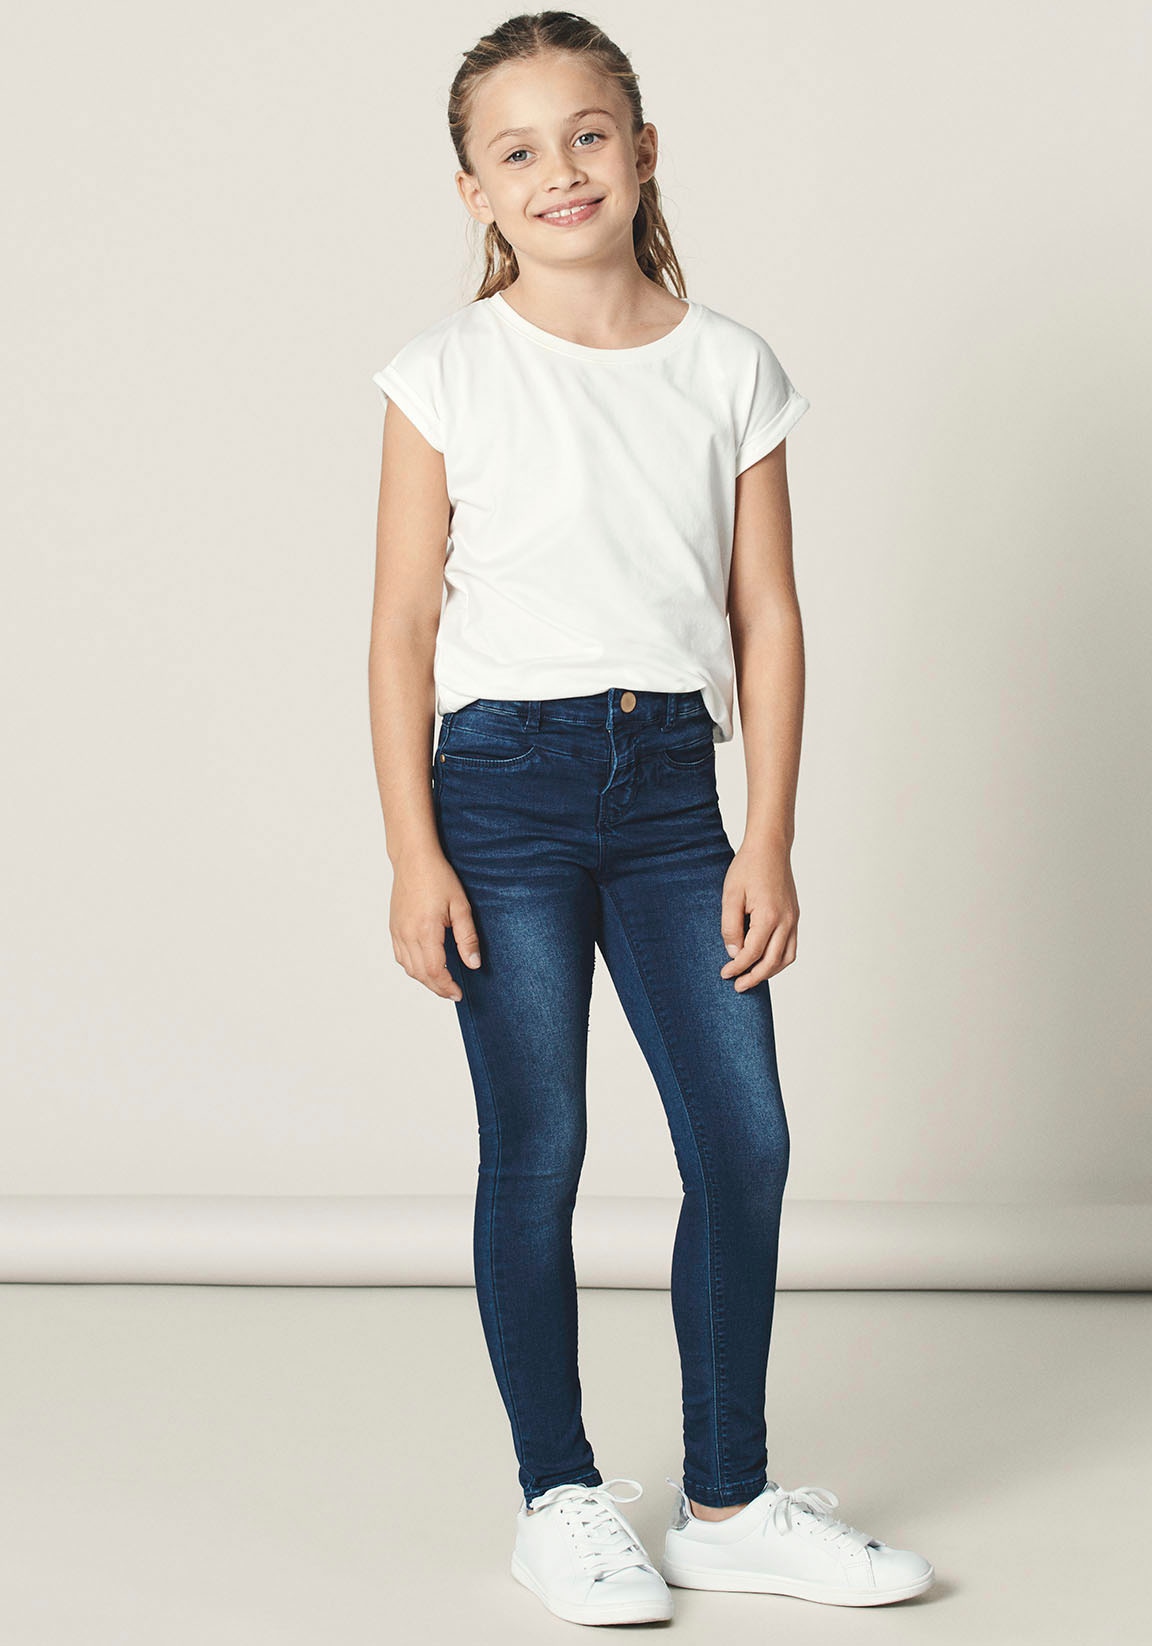 »NKFPOLLY«, in kaufen It Stretch-Jeans Name schmaler online Passform